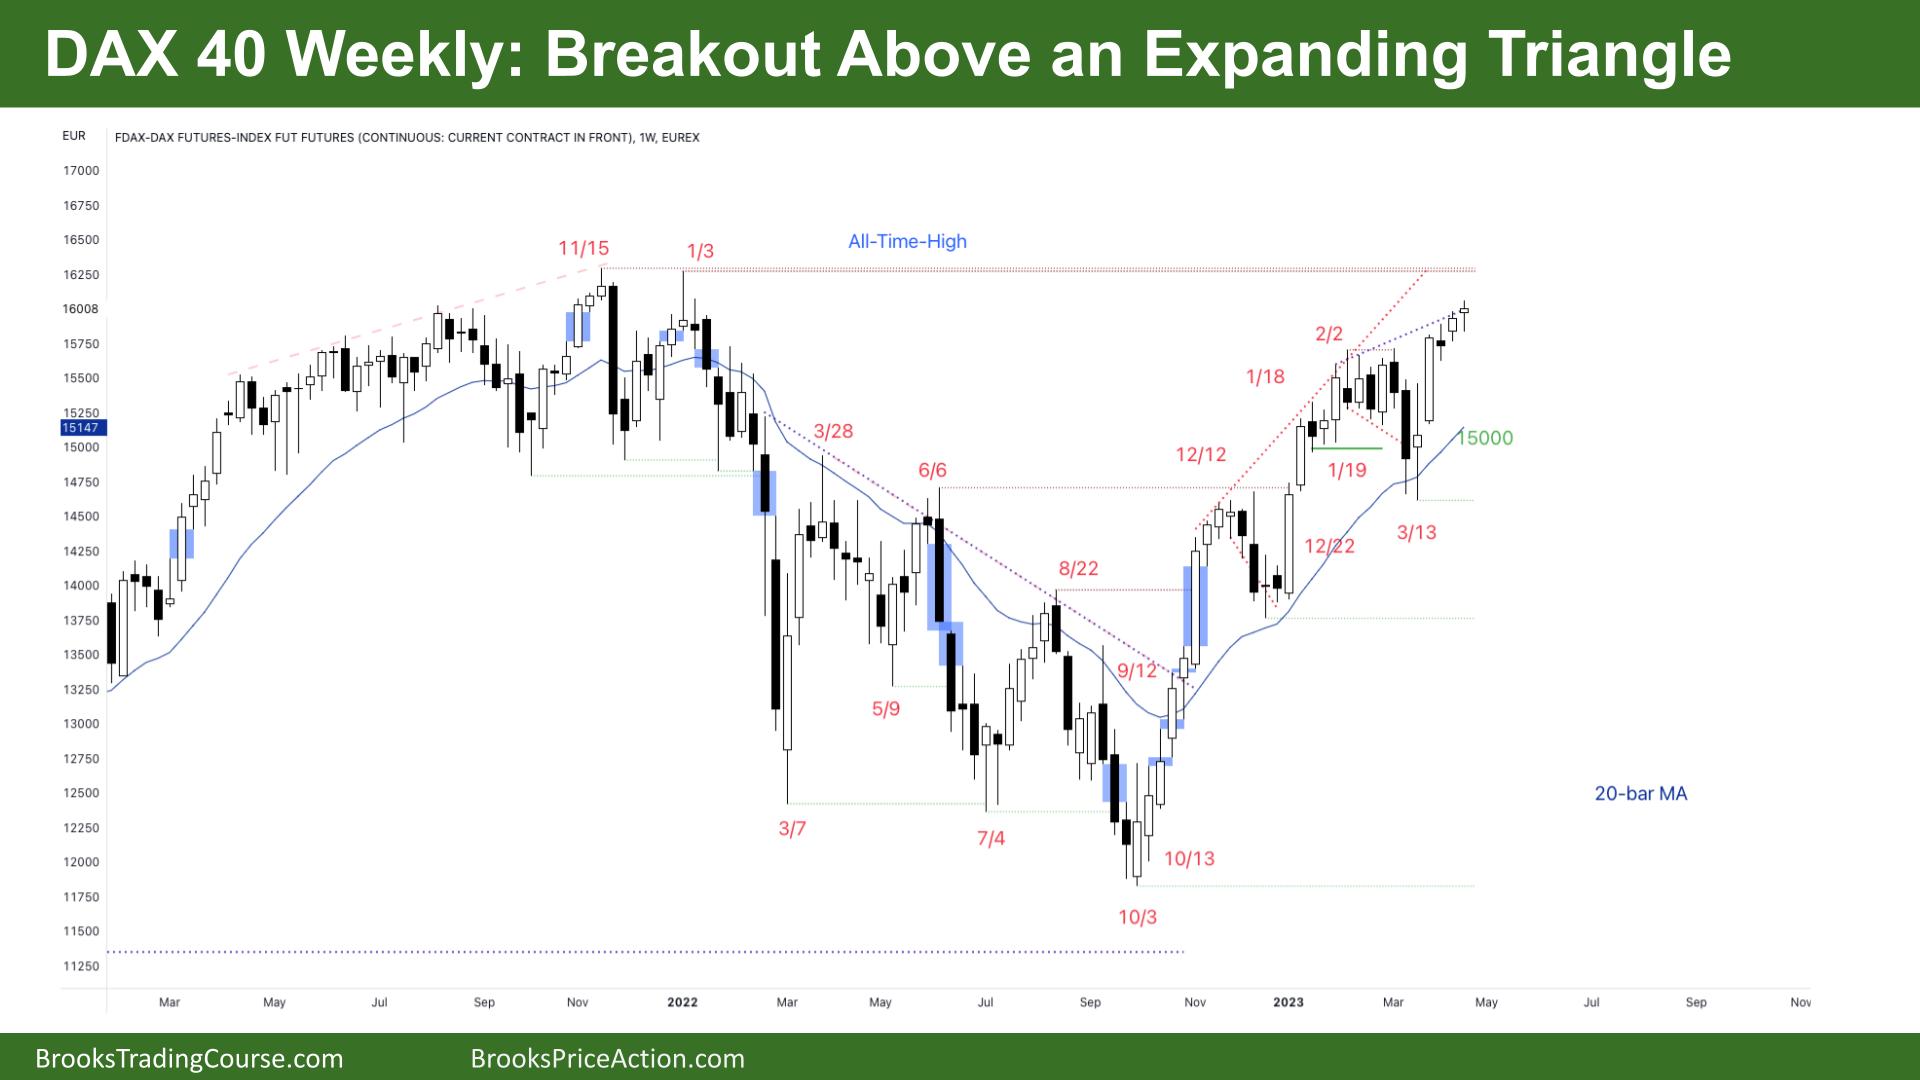 DAX 40 Breakout above Expanding Triangle